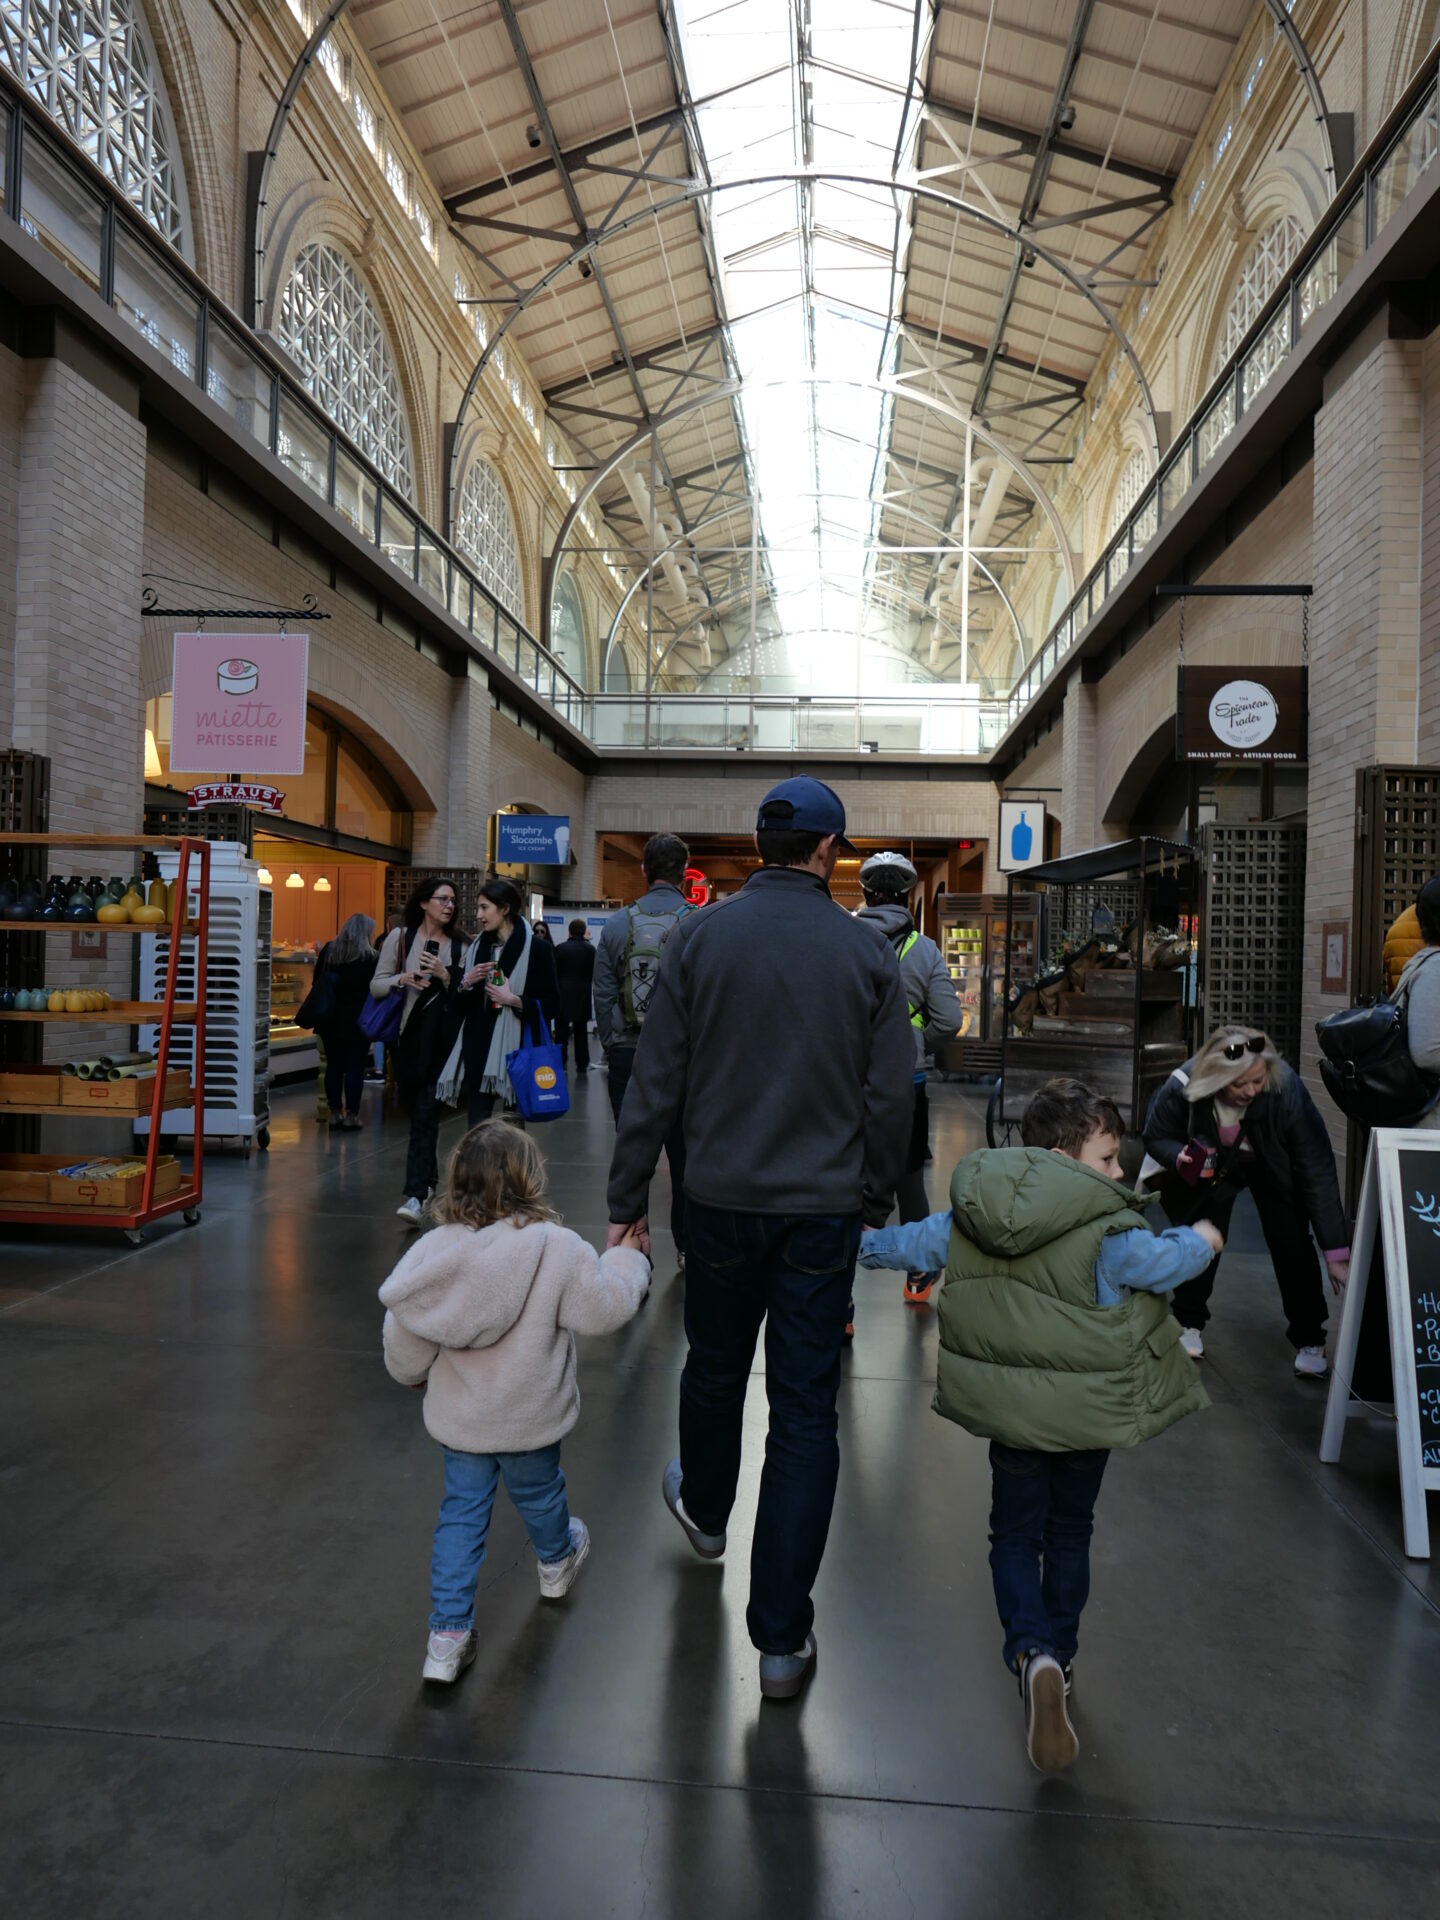 San Francisco Ferry Building for lunch